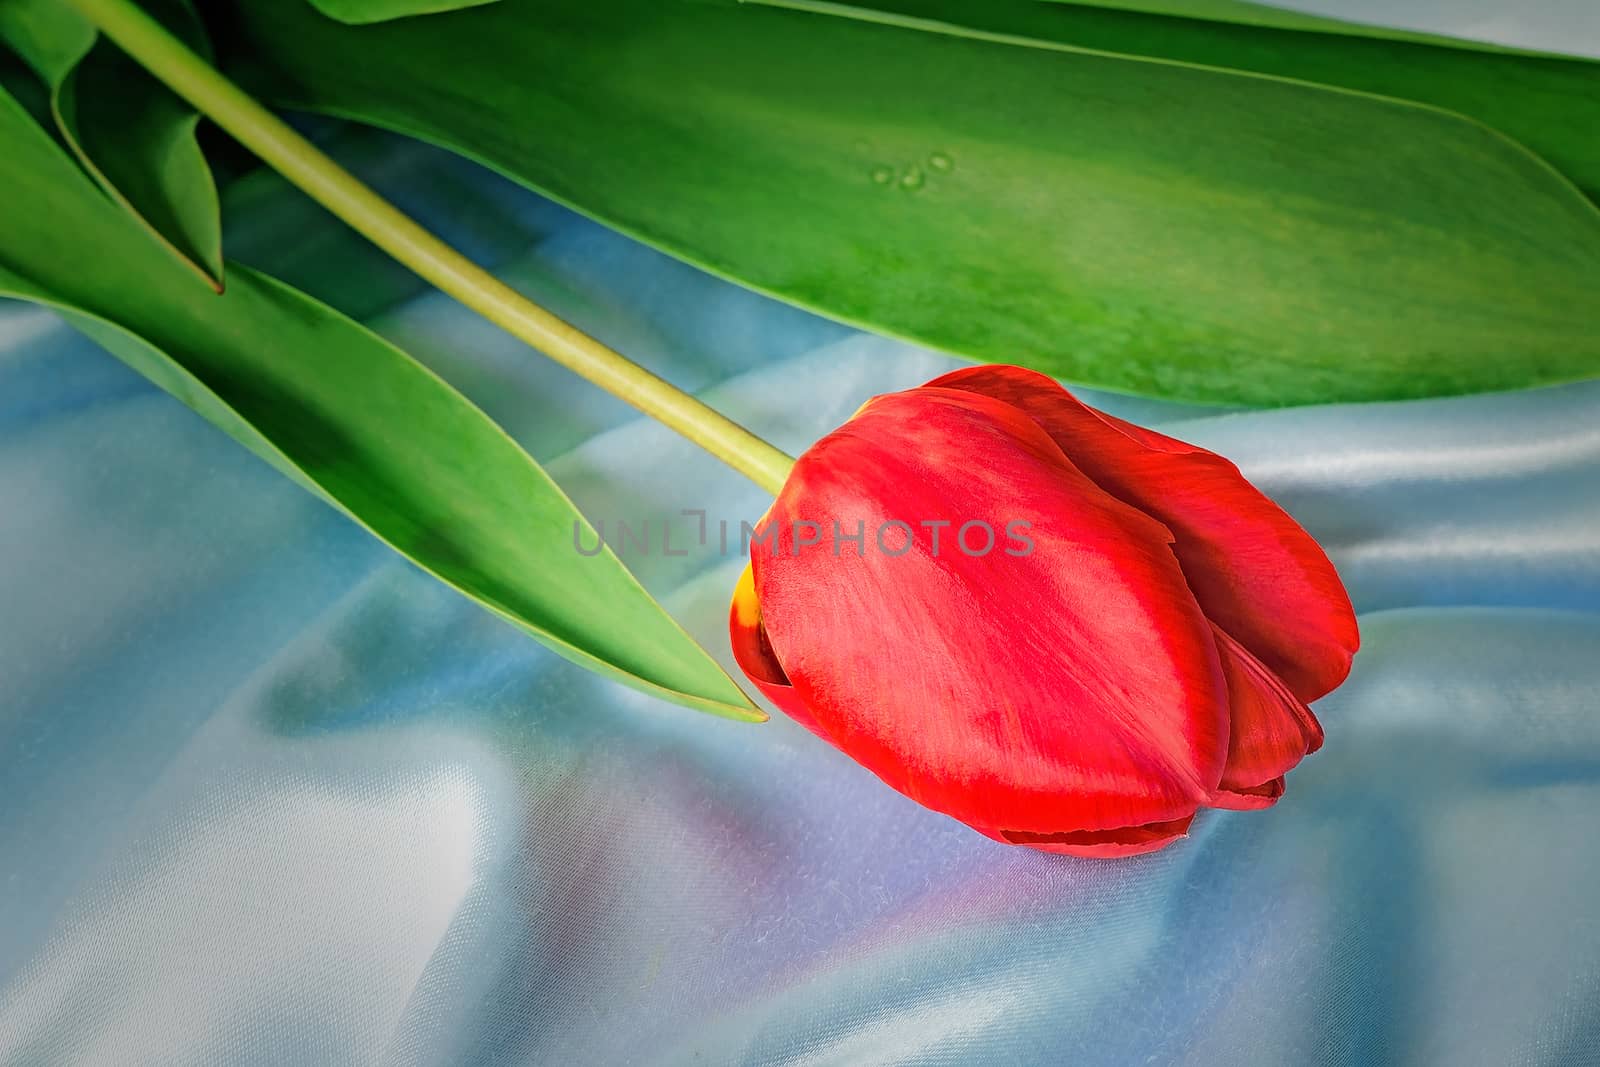 One big beautiful tulip of bright red color with green leaves against blue silk